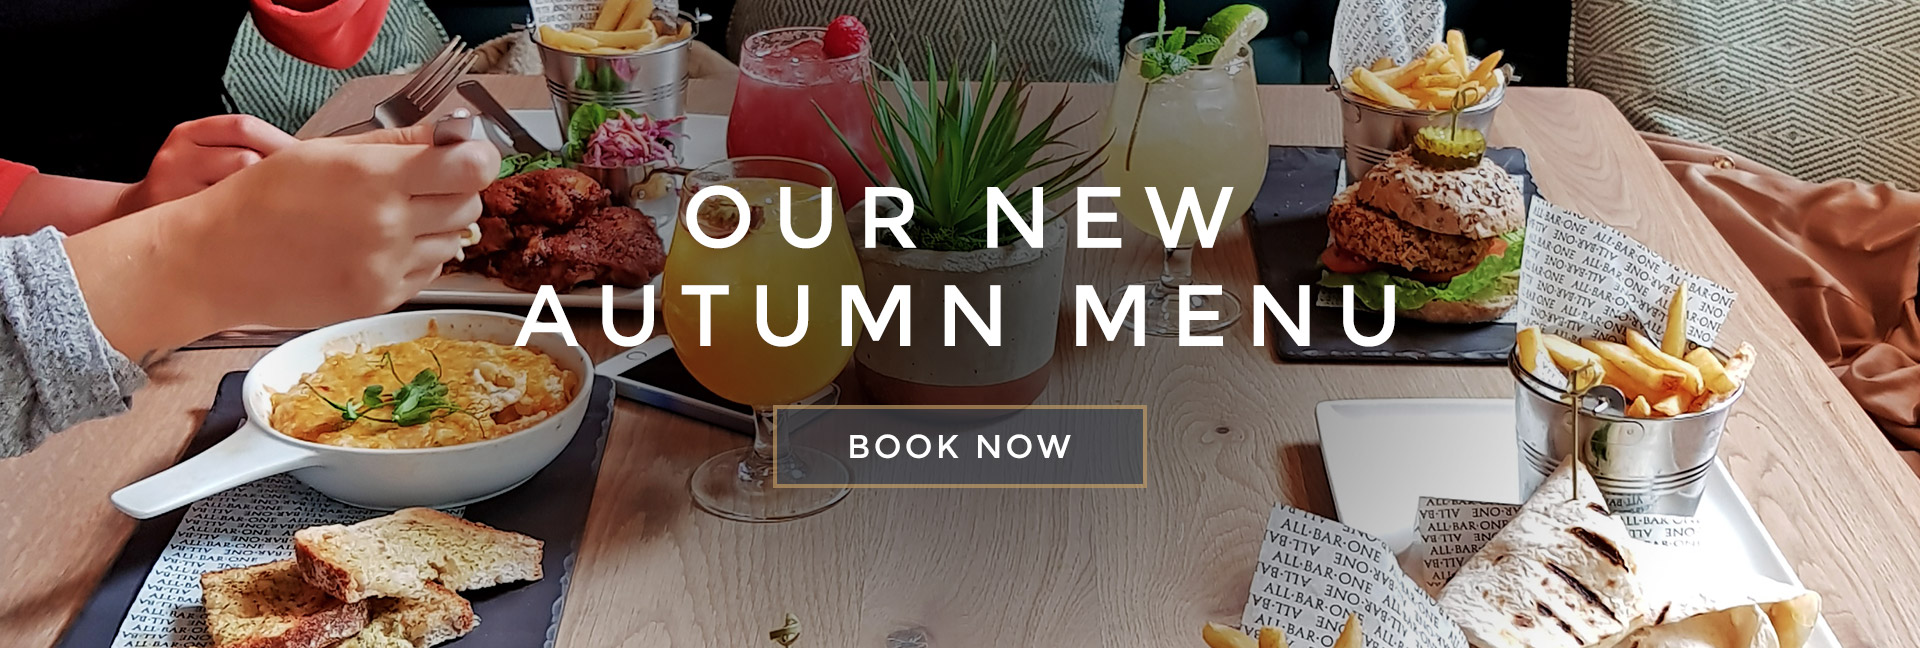 Our new Autumn menu at All Bar One The O2 - Book now